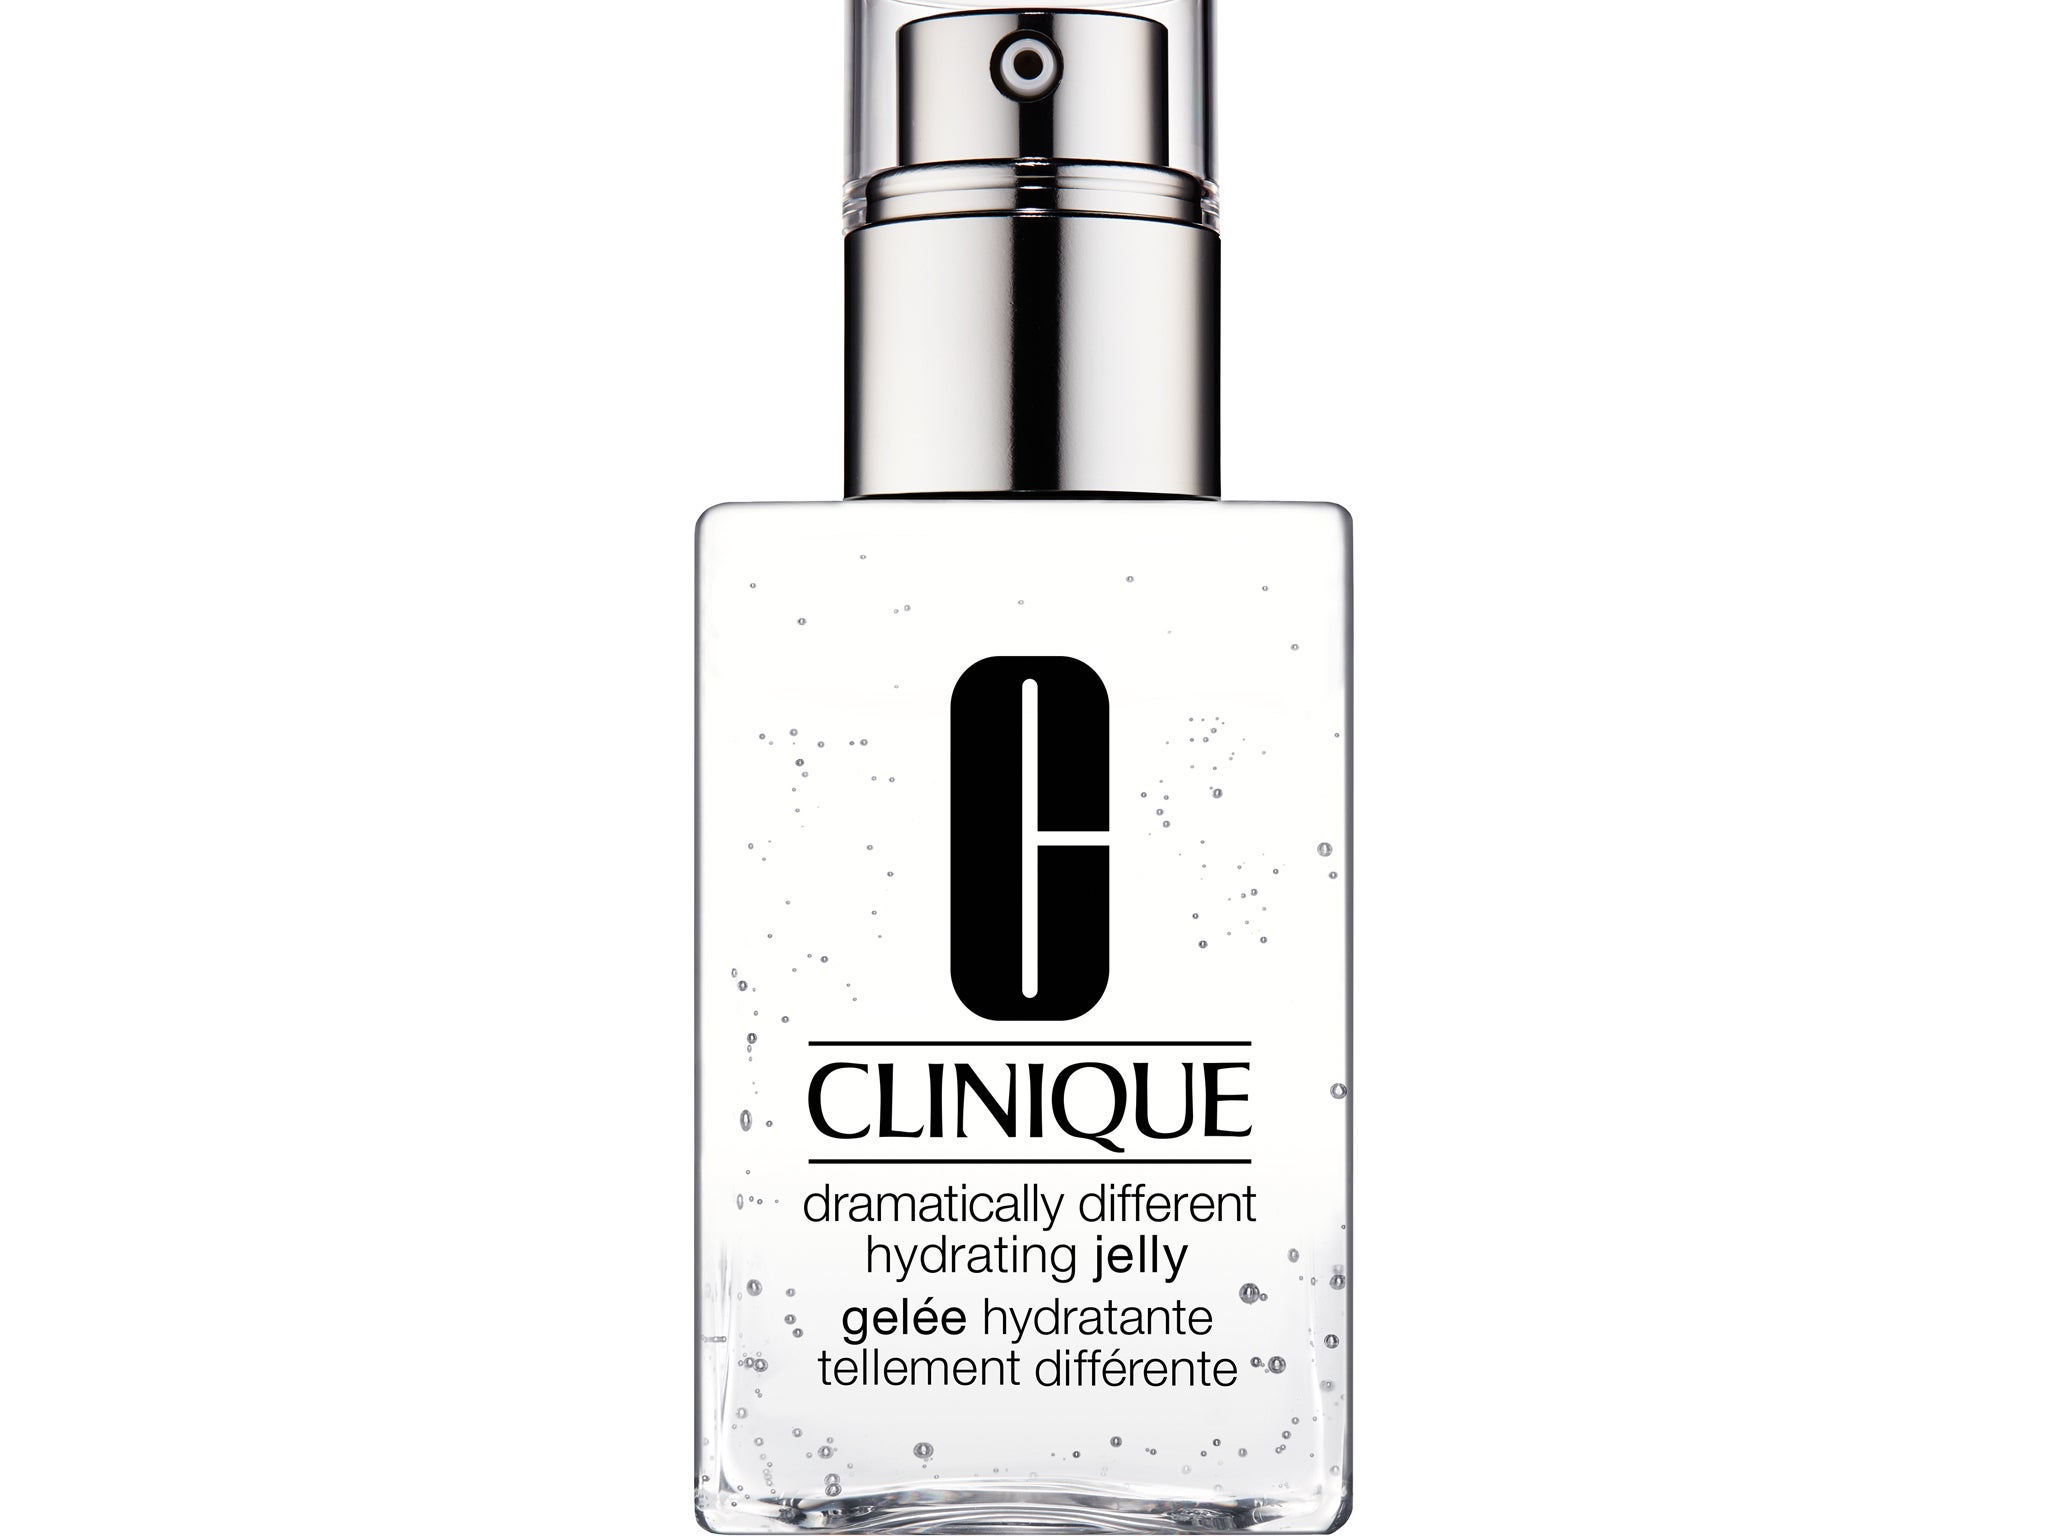 Clinique Dramatically Different Hydrating Jelly.jpg